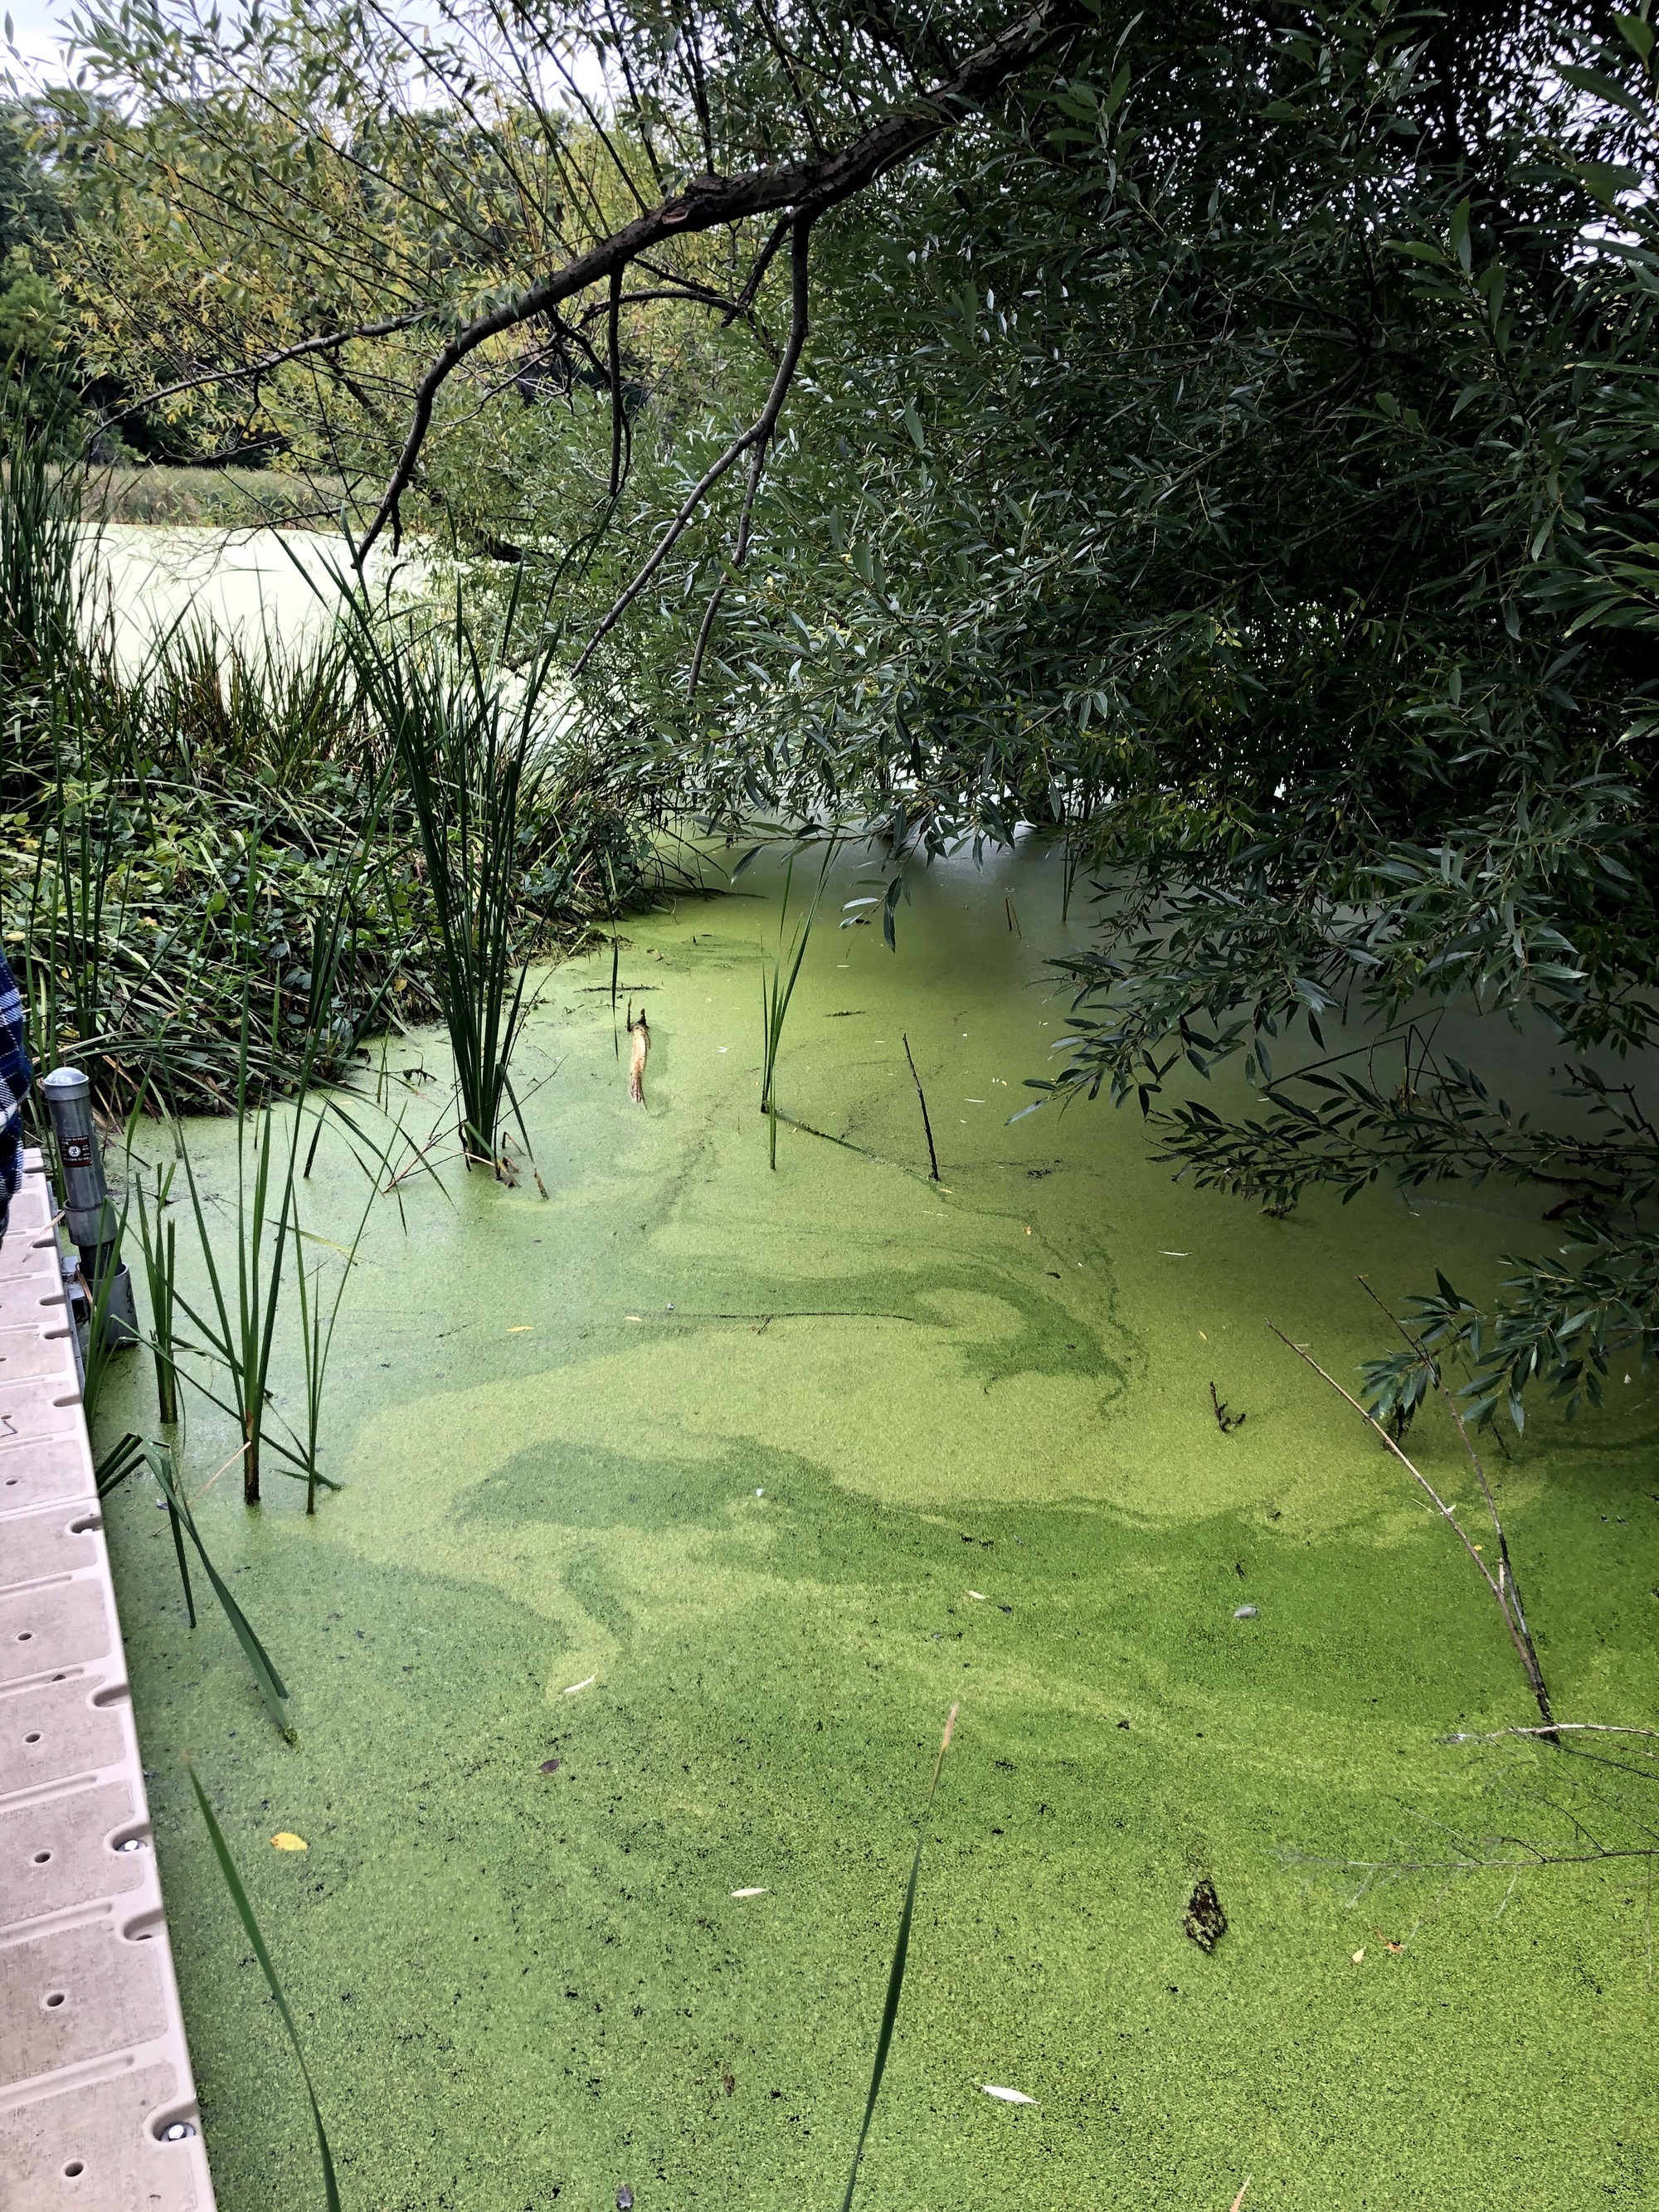 Image of the pond with a dock on the left side of the photo. Green duckweed covering the surface of the pond. In the background of photo, there are branches and an island of plants in the pond.